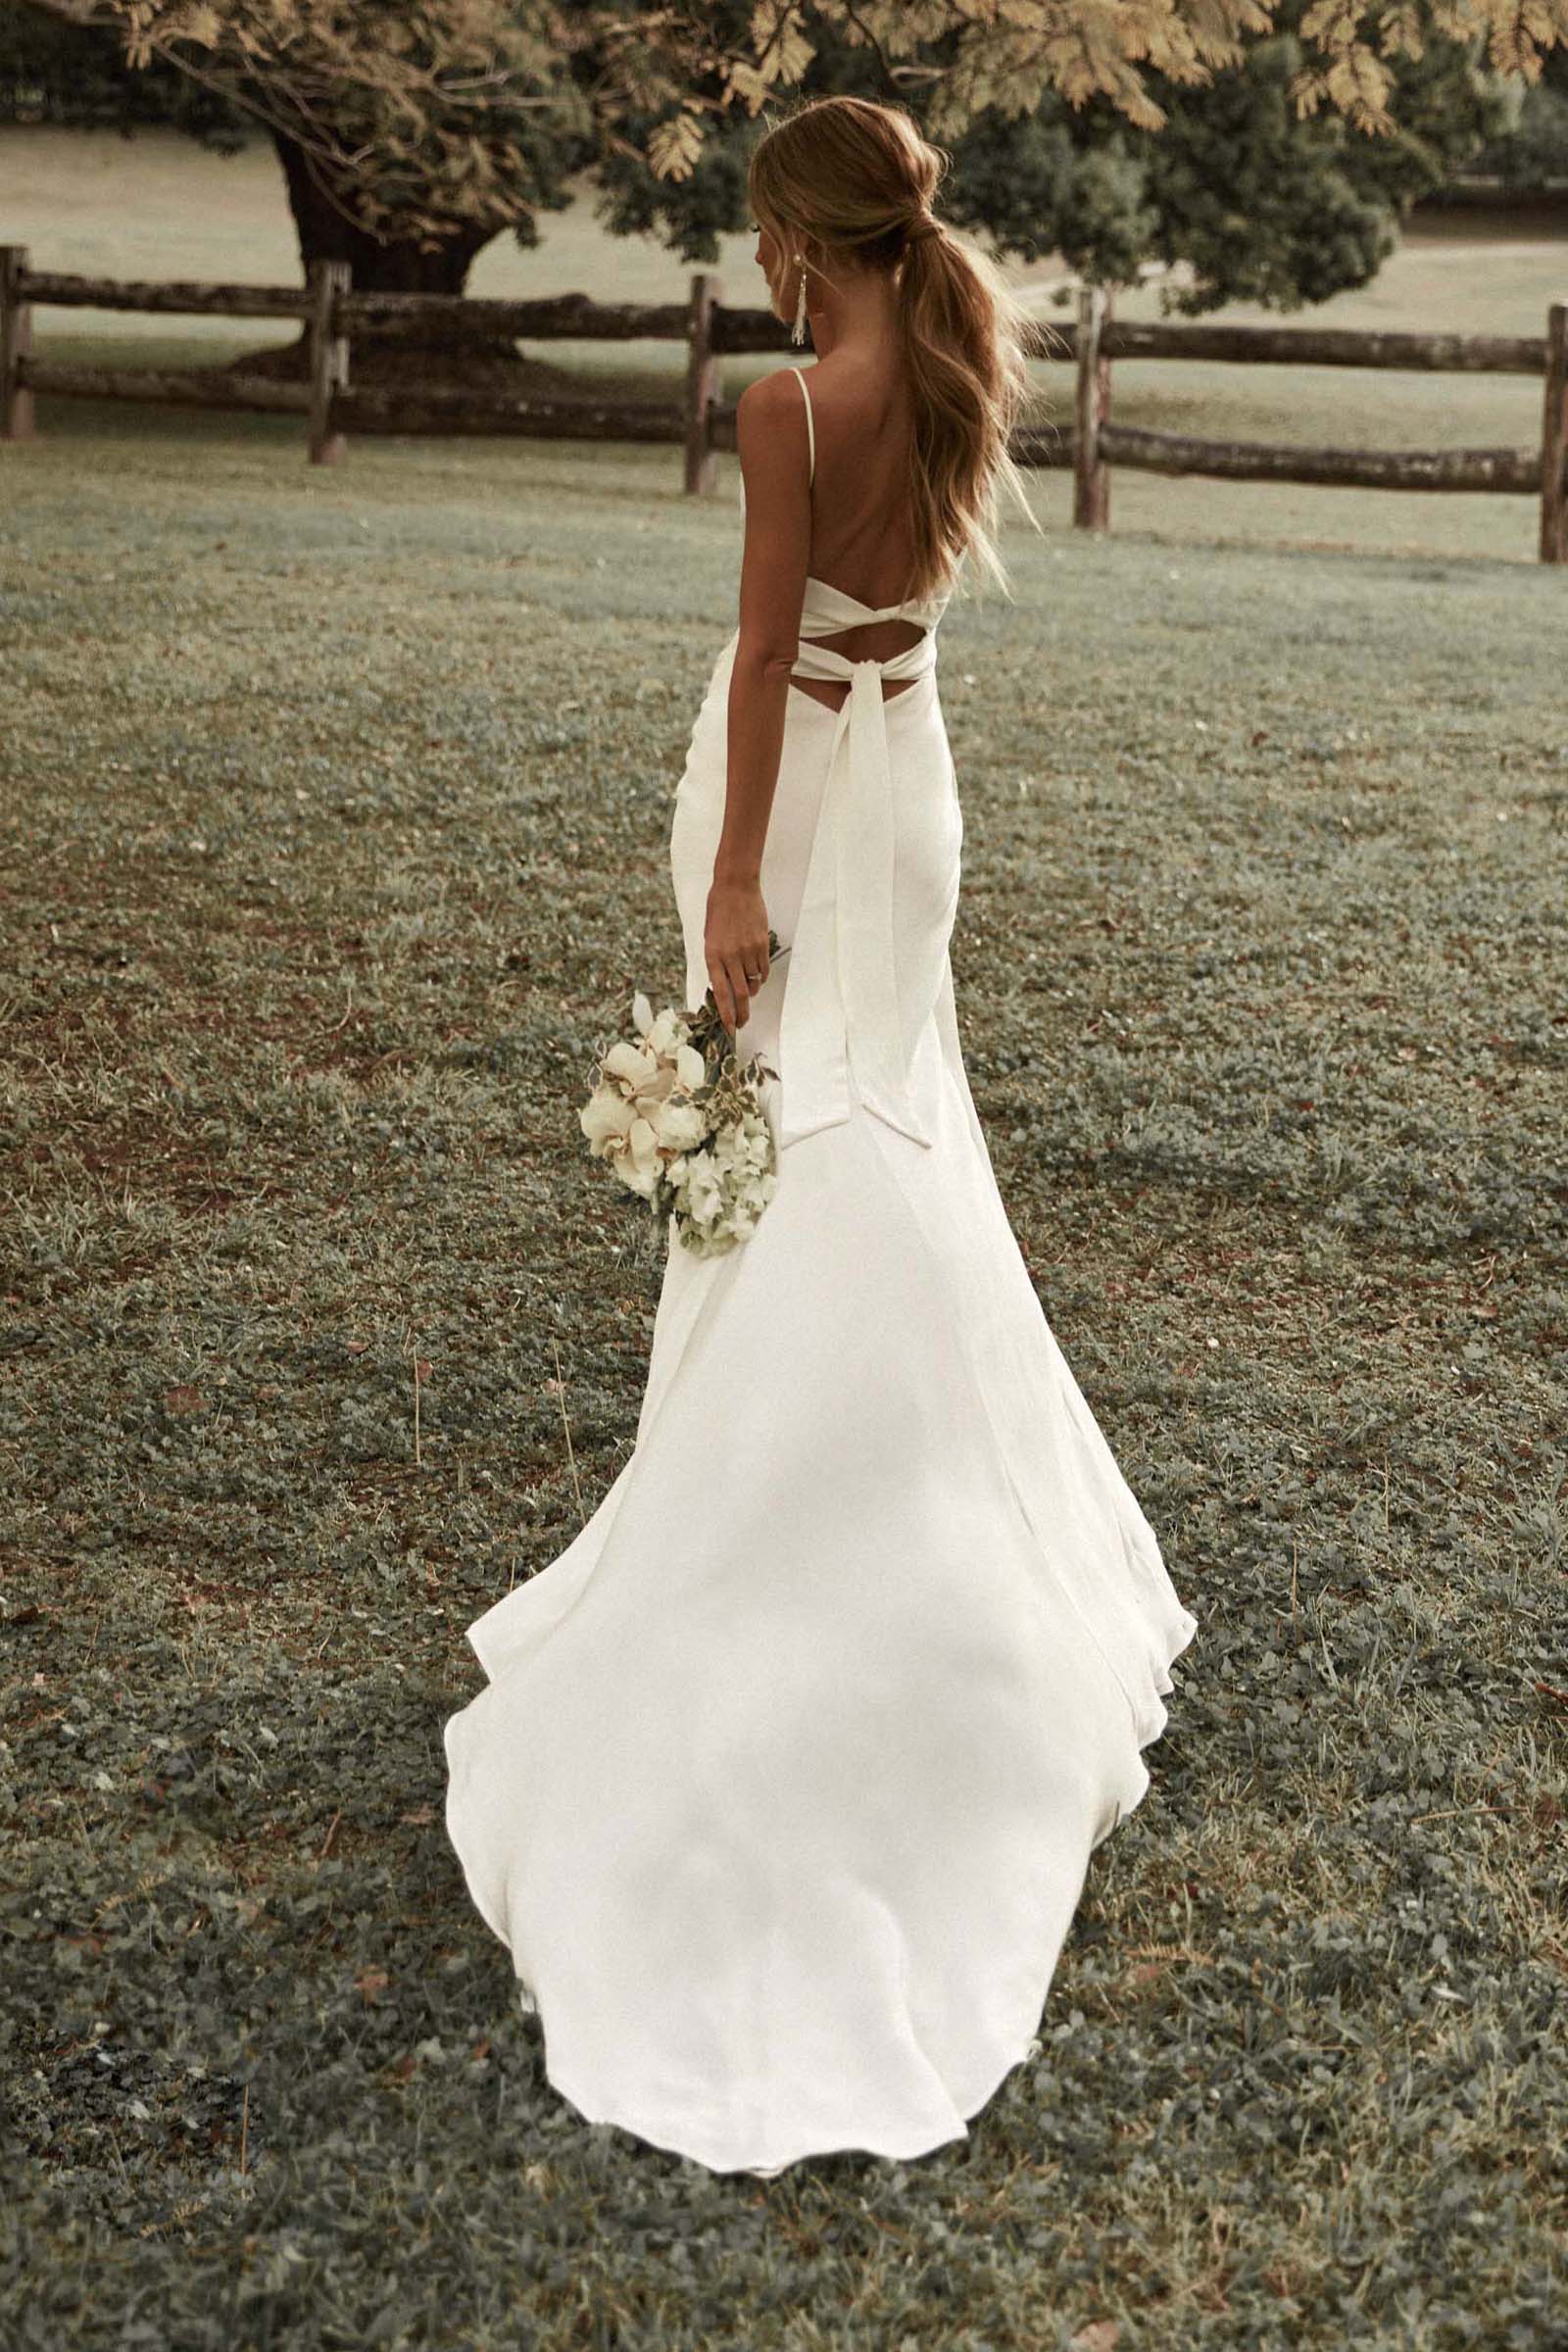 Check Out This Epic Selection of 2 Piece Wedding Dresses NOW